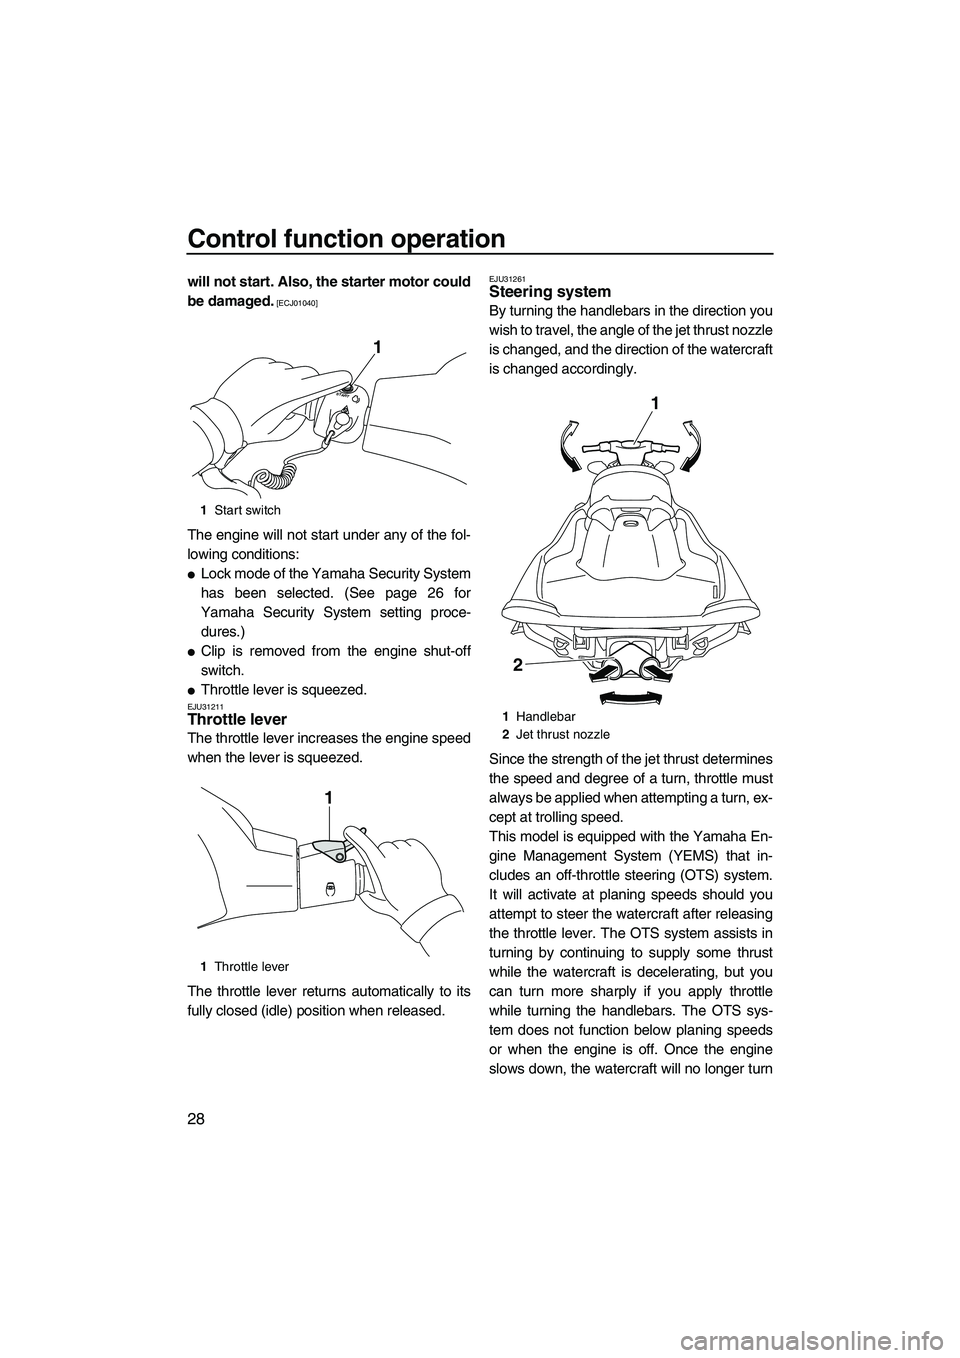 YAMAHA VXS 2012  Owners Manual Control function operation
28
will not start. Also, the starter motor could
be damaged.
 [ECJ01040]
The engine will not start under any of the fol-
lowing conditions:
Lock mode of the Yamaha Security